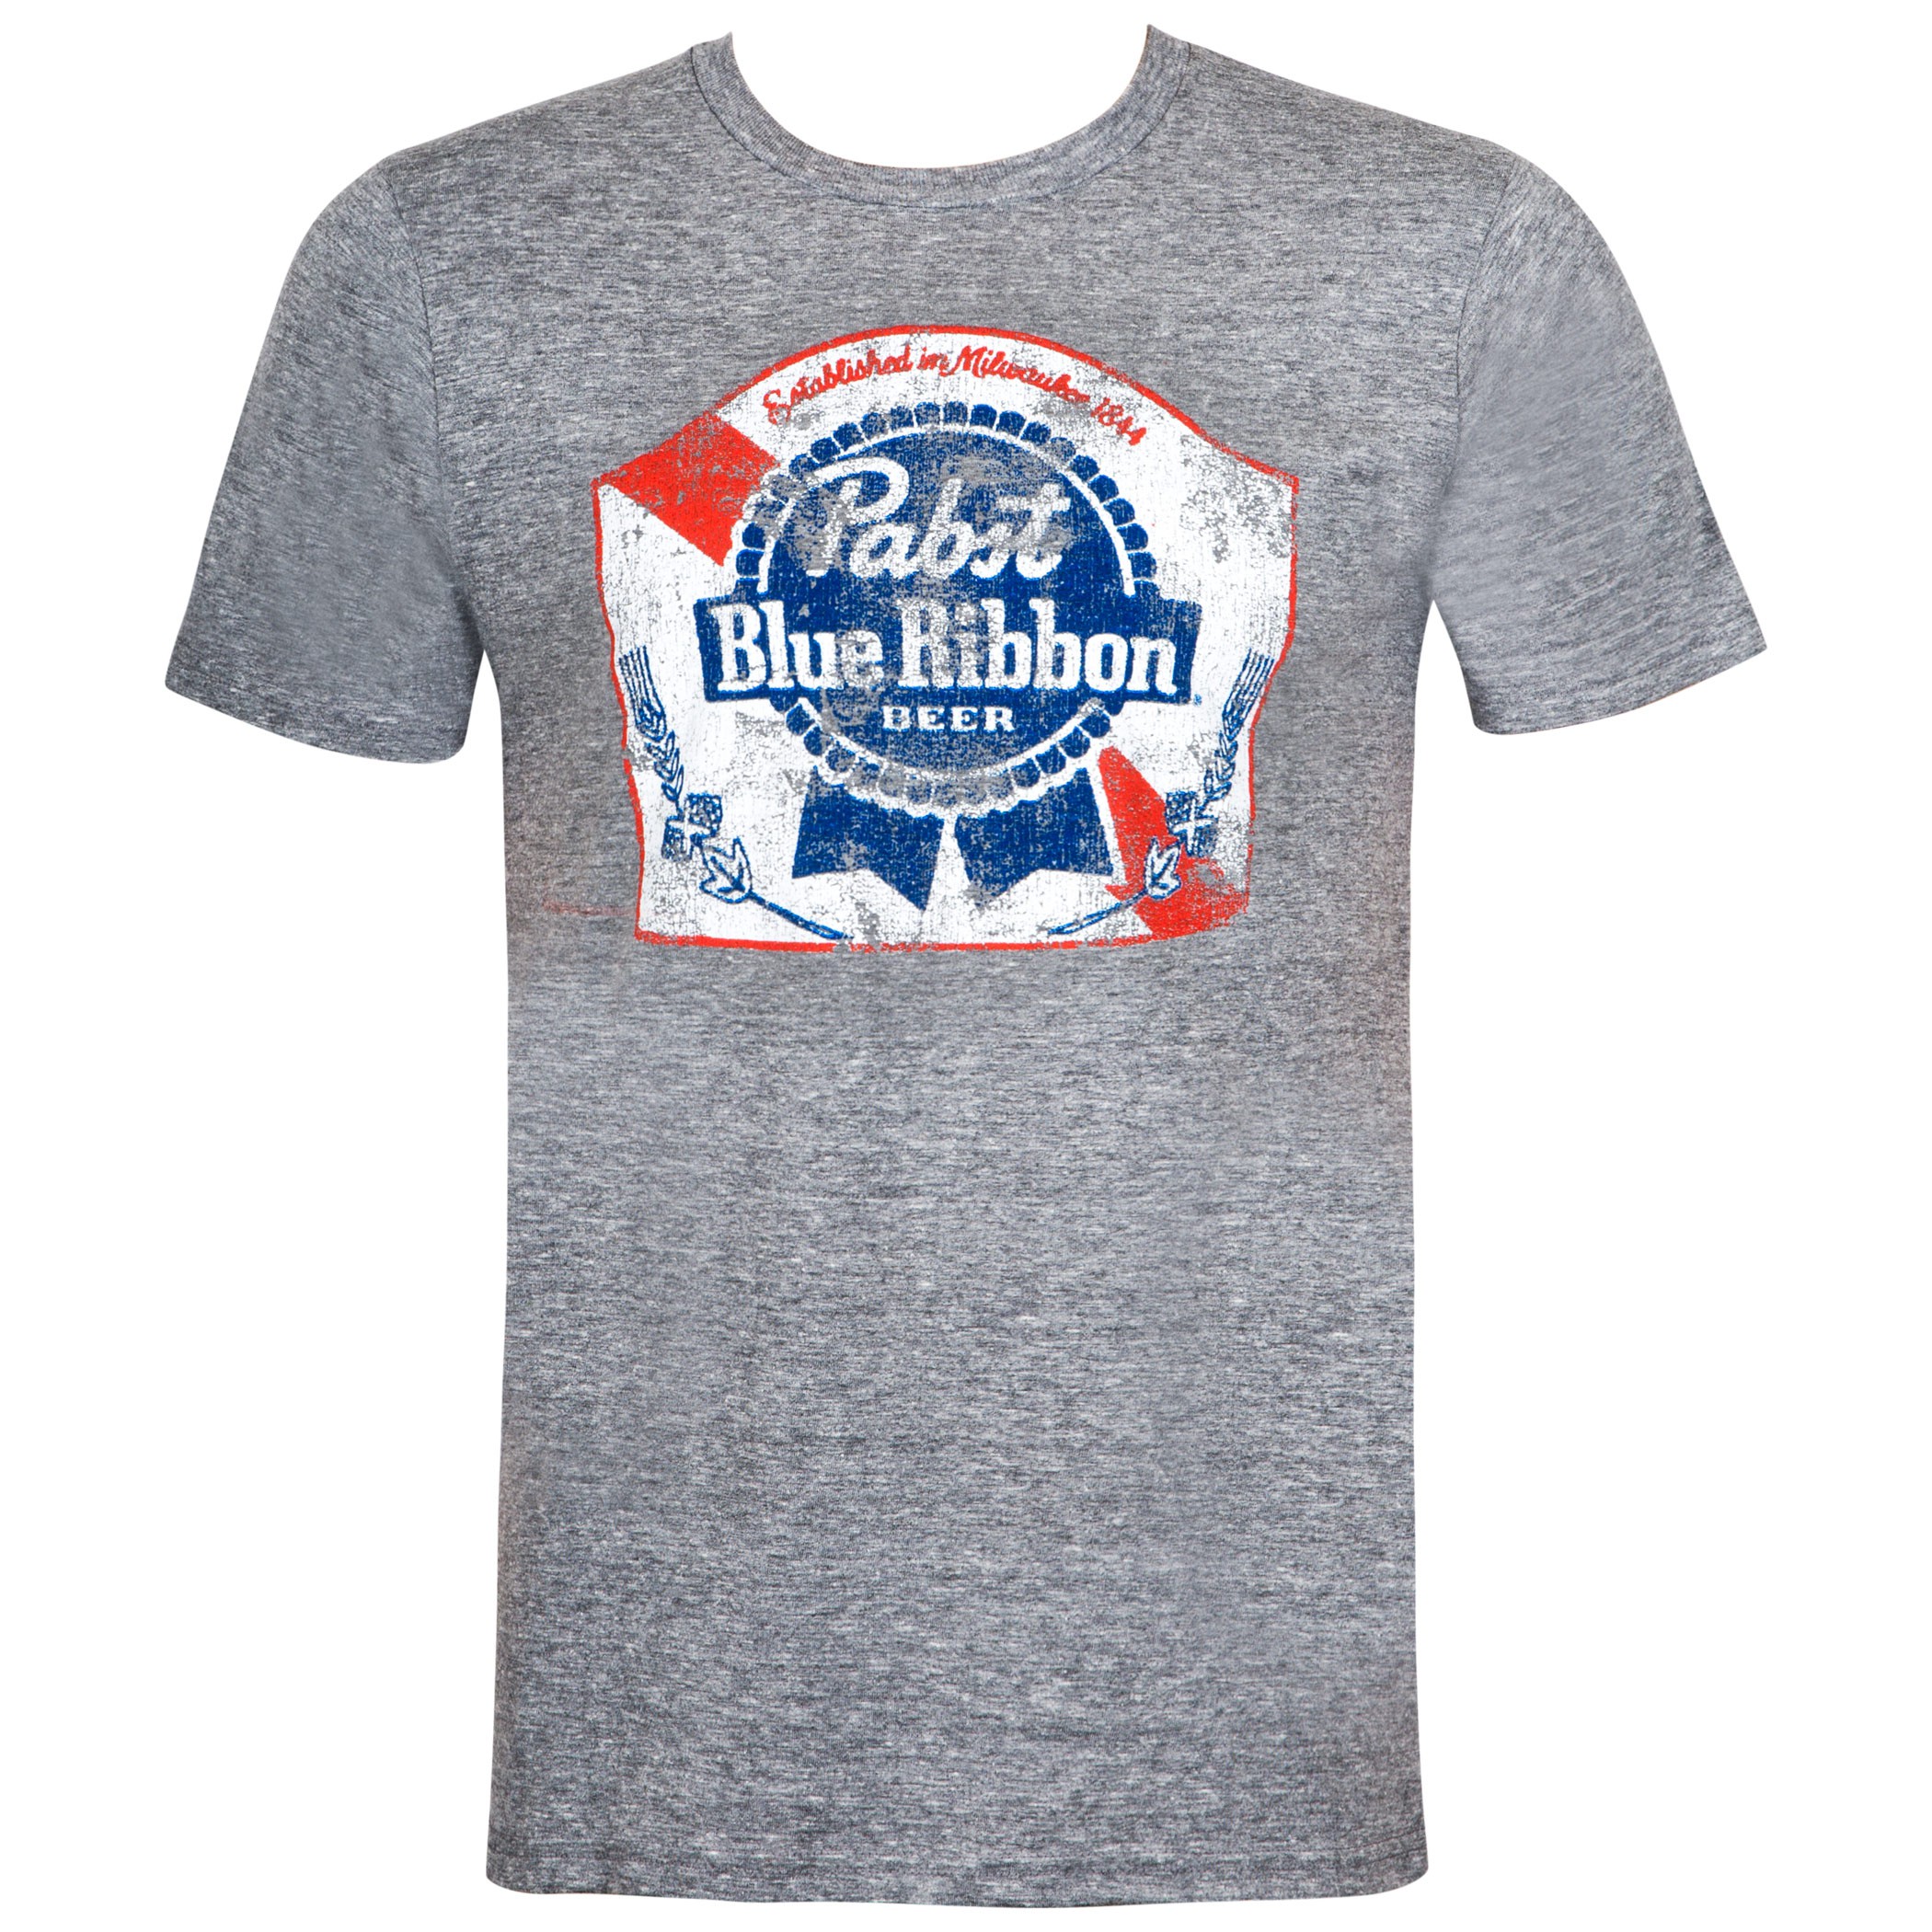 Pabst Blue Ribbon Milwaukee Beer White T shirt Size XL BRAND NEW PBR